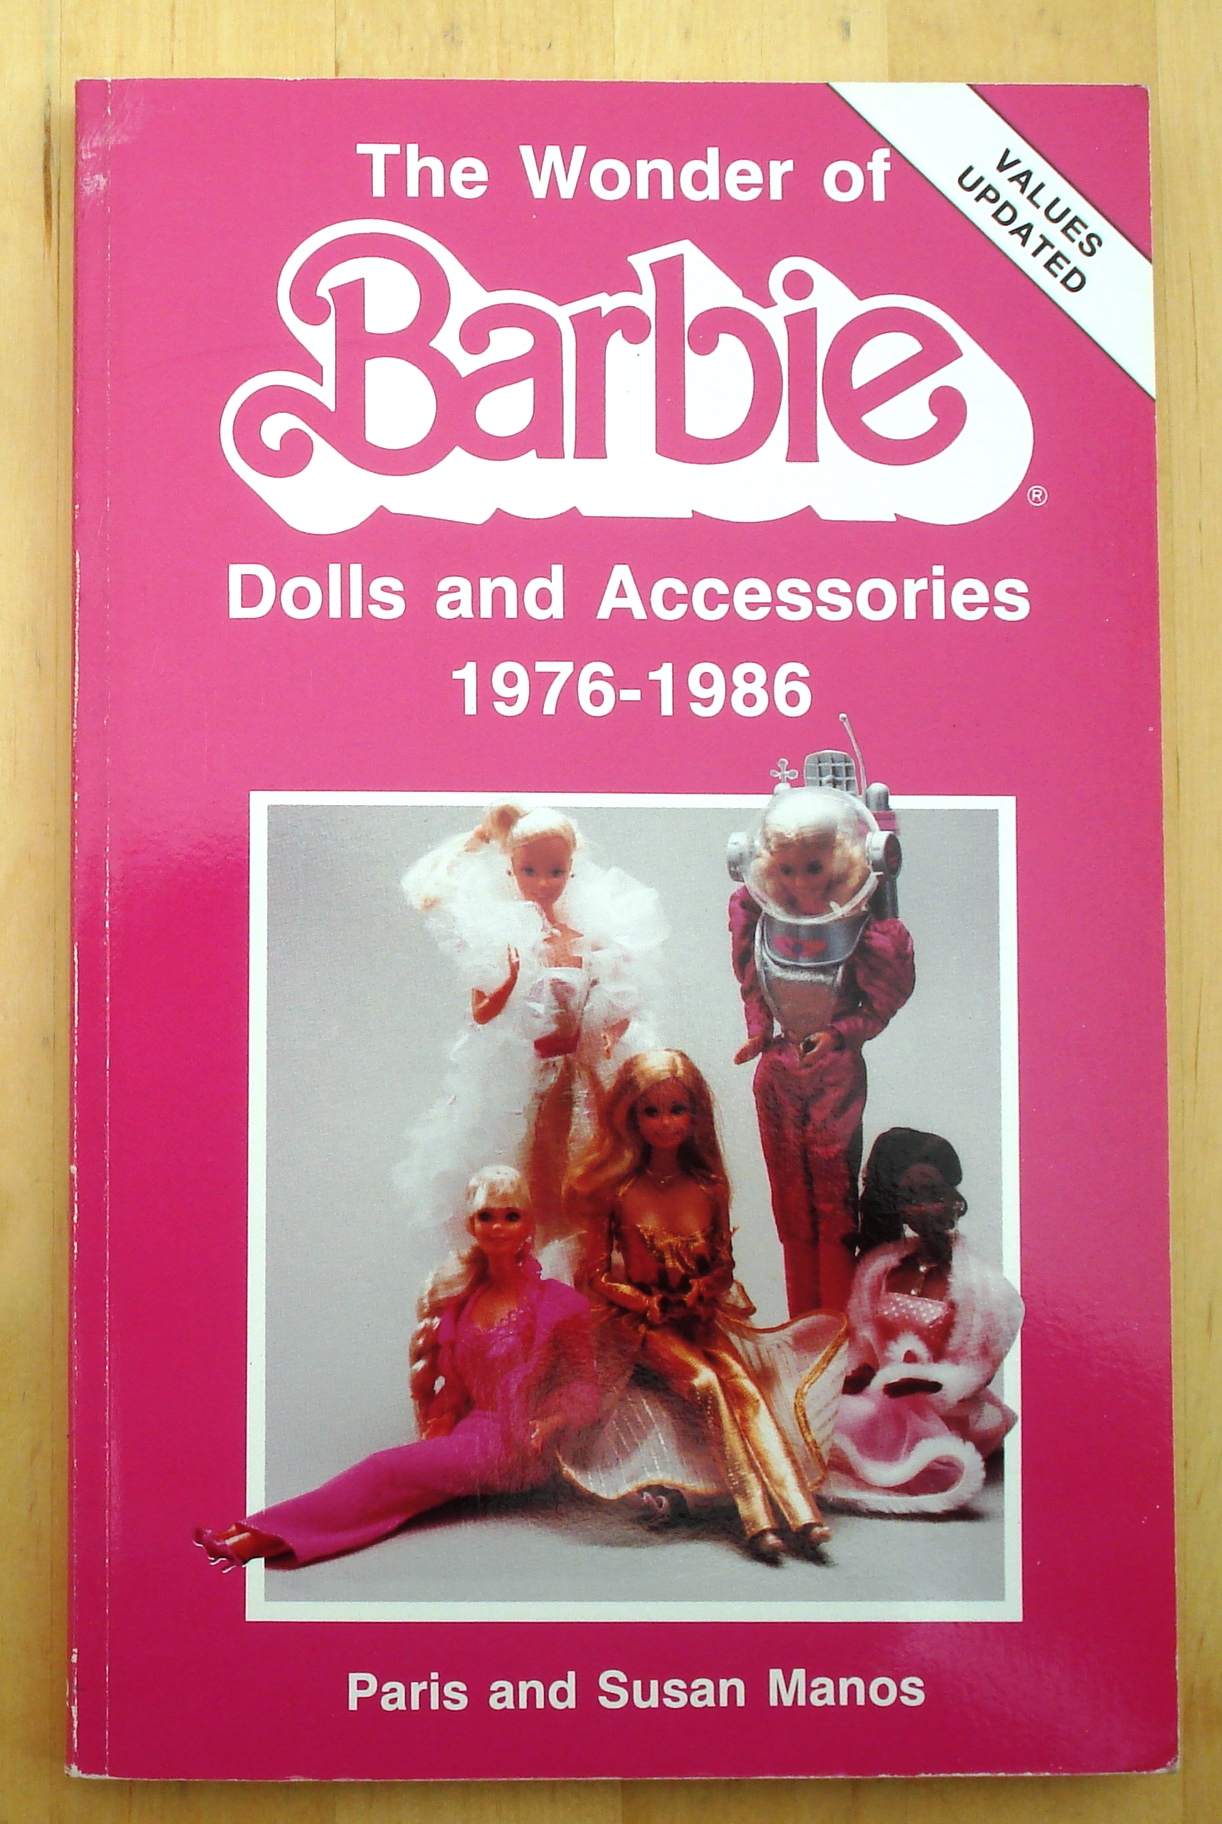 The Wonder of Barbie Dolls and Accessoiries 1976 - 1986 updated